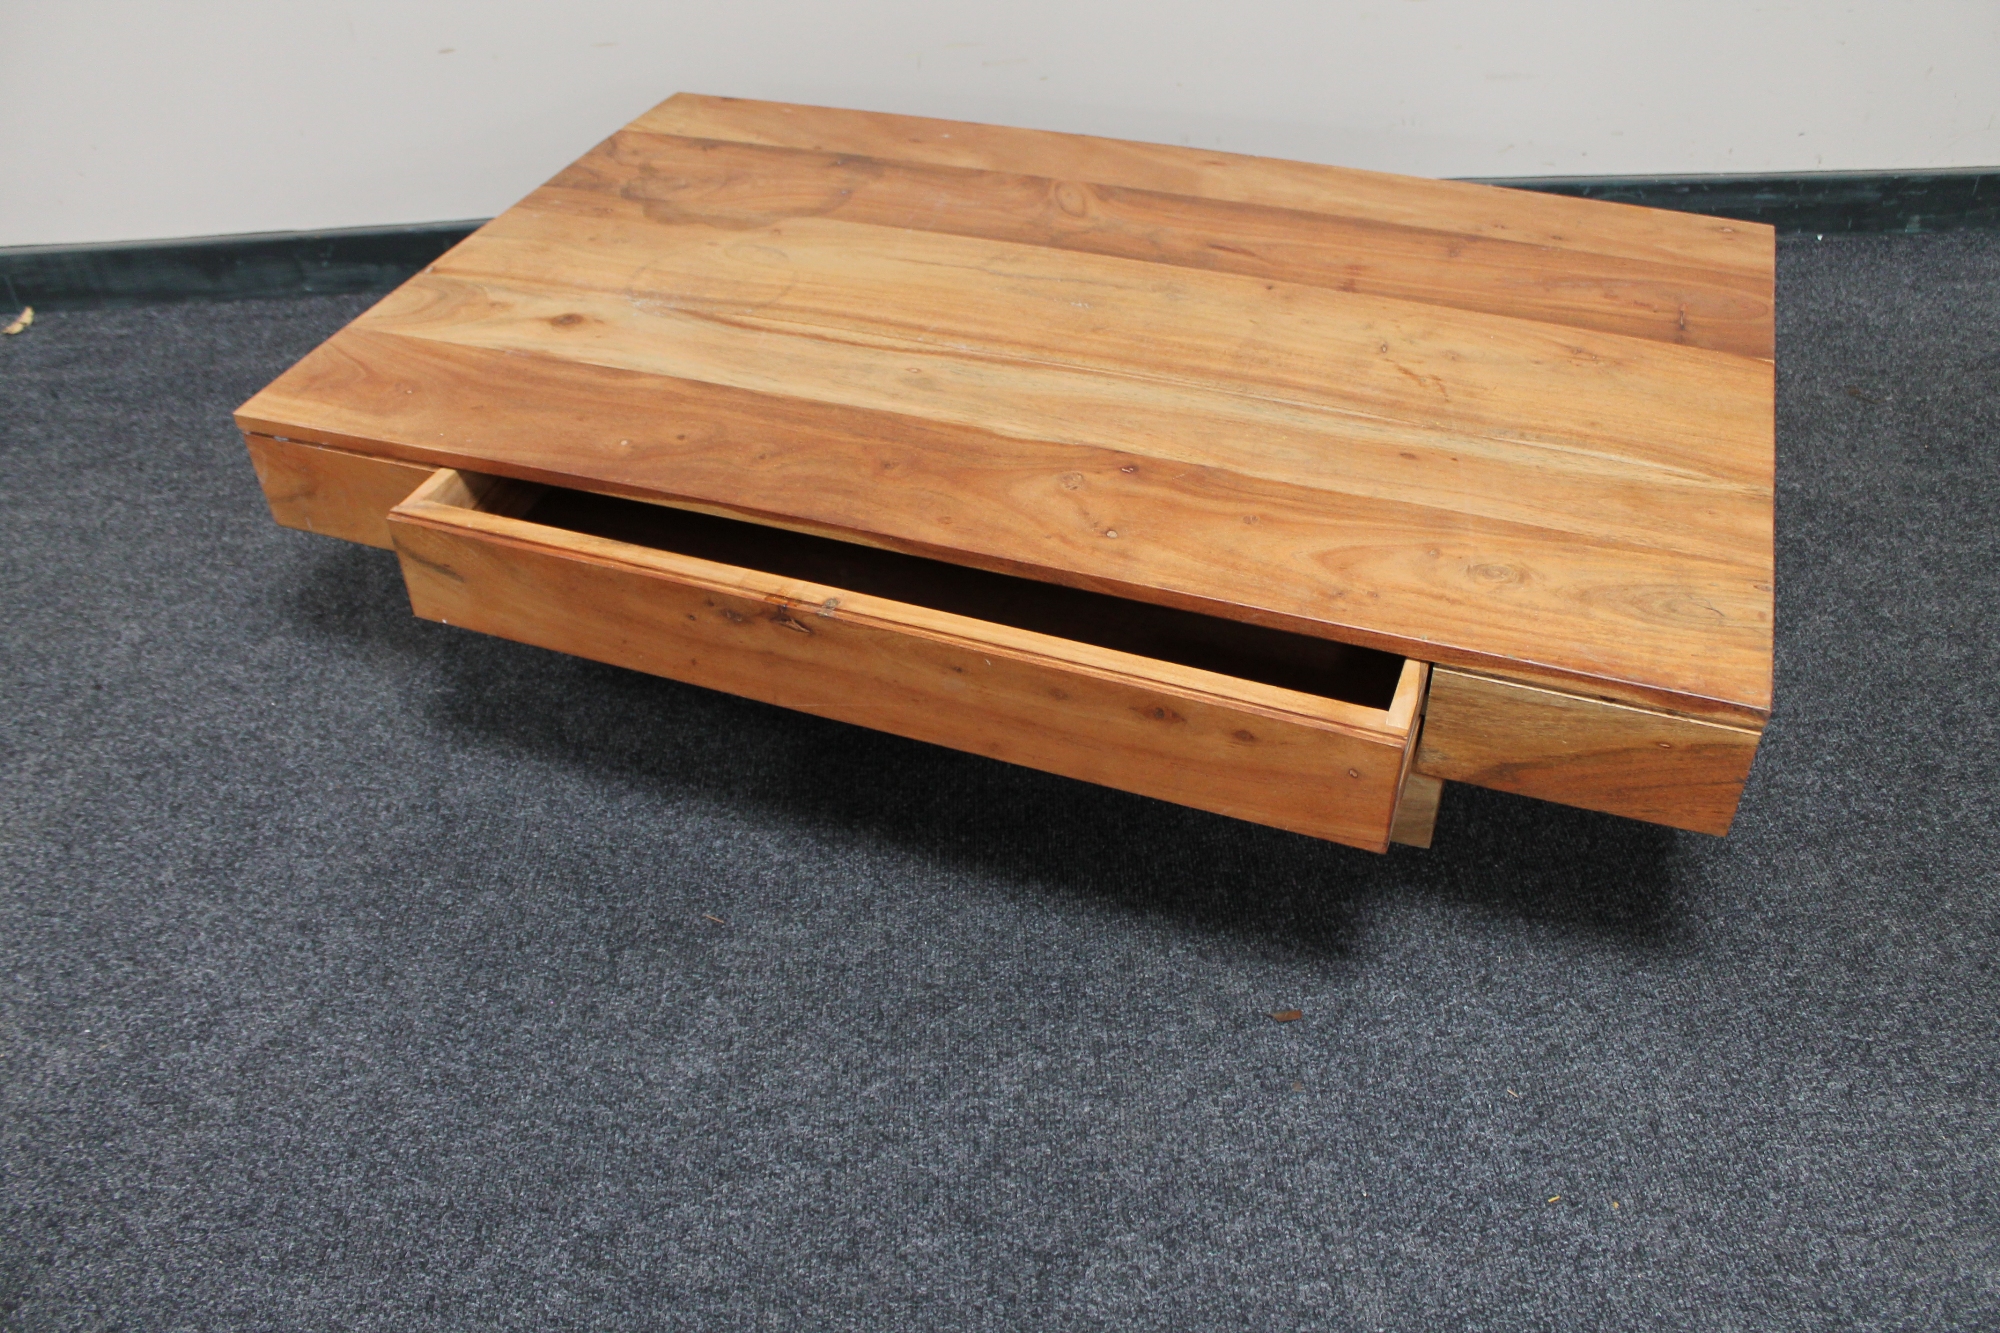 A sheesham wood coffee table fitted a drawer.